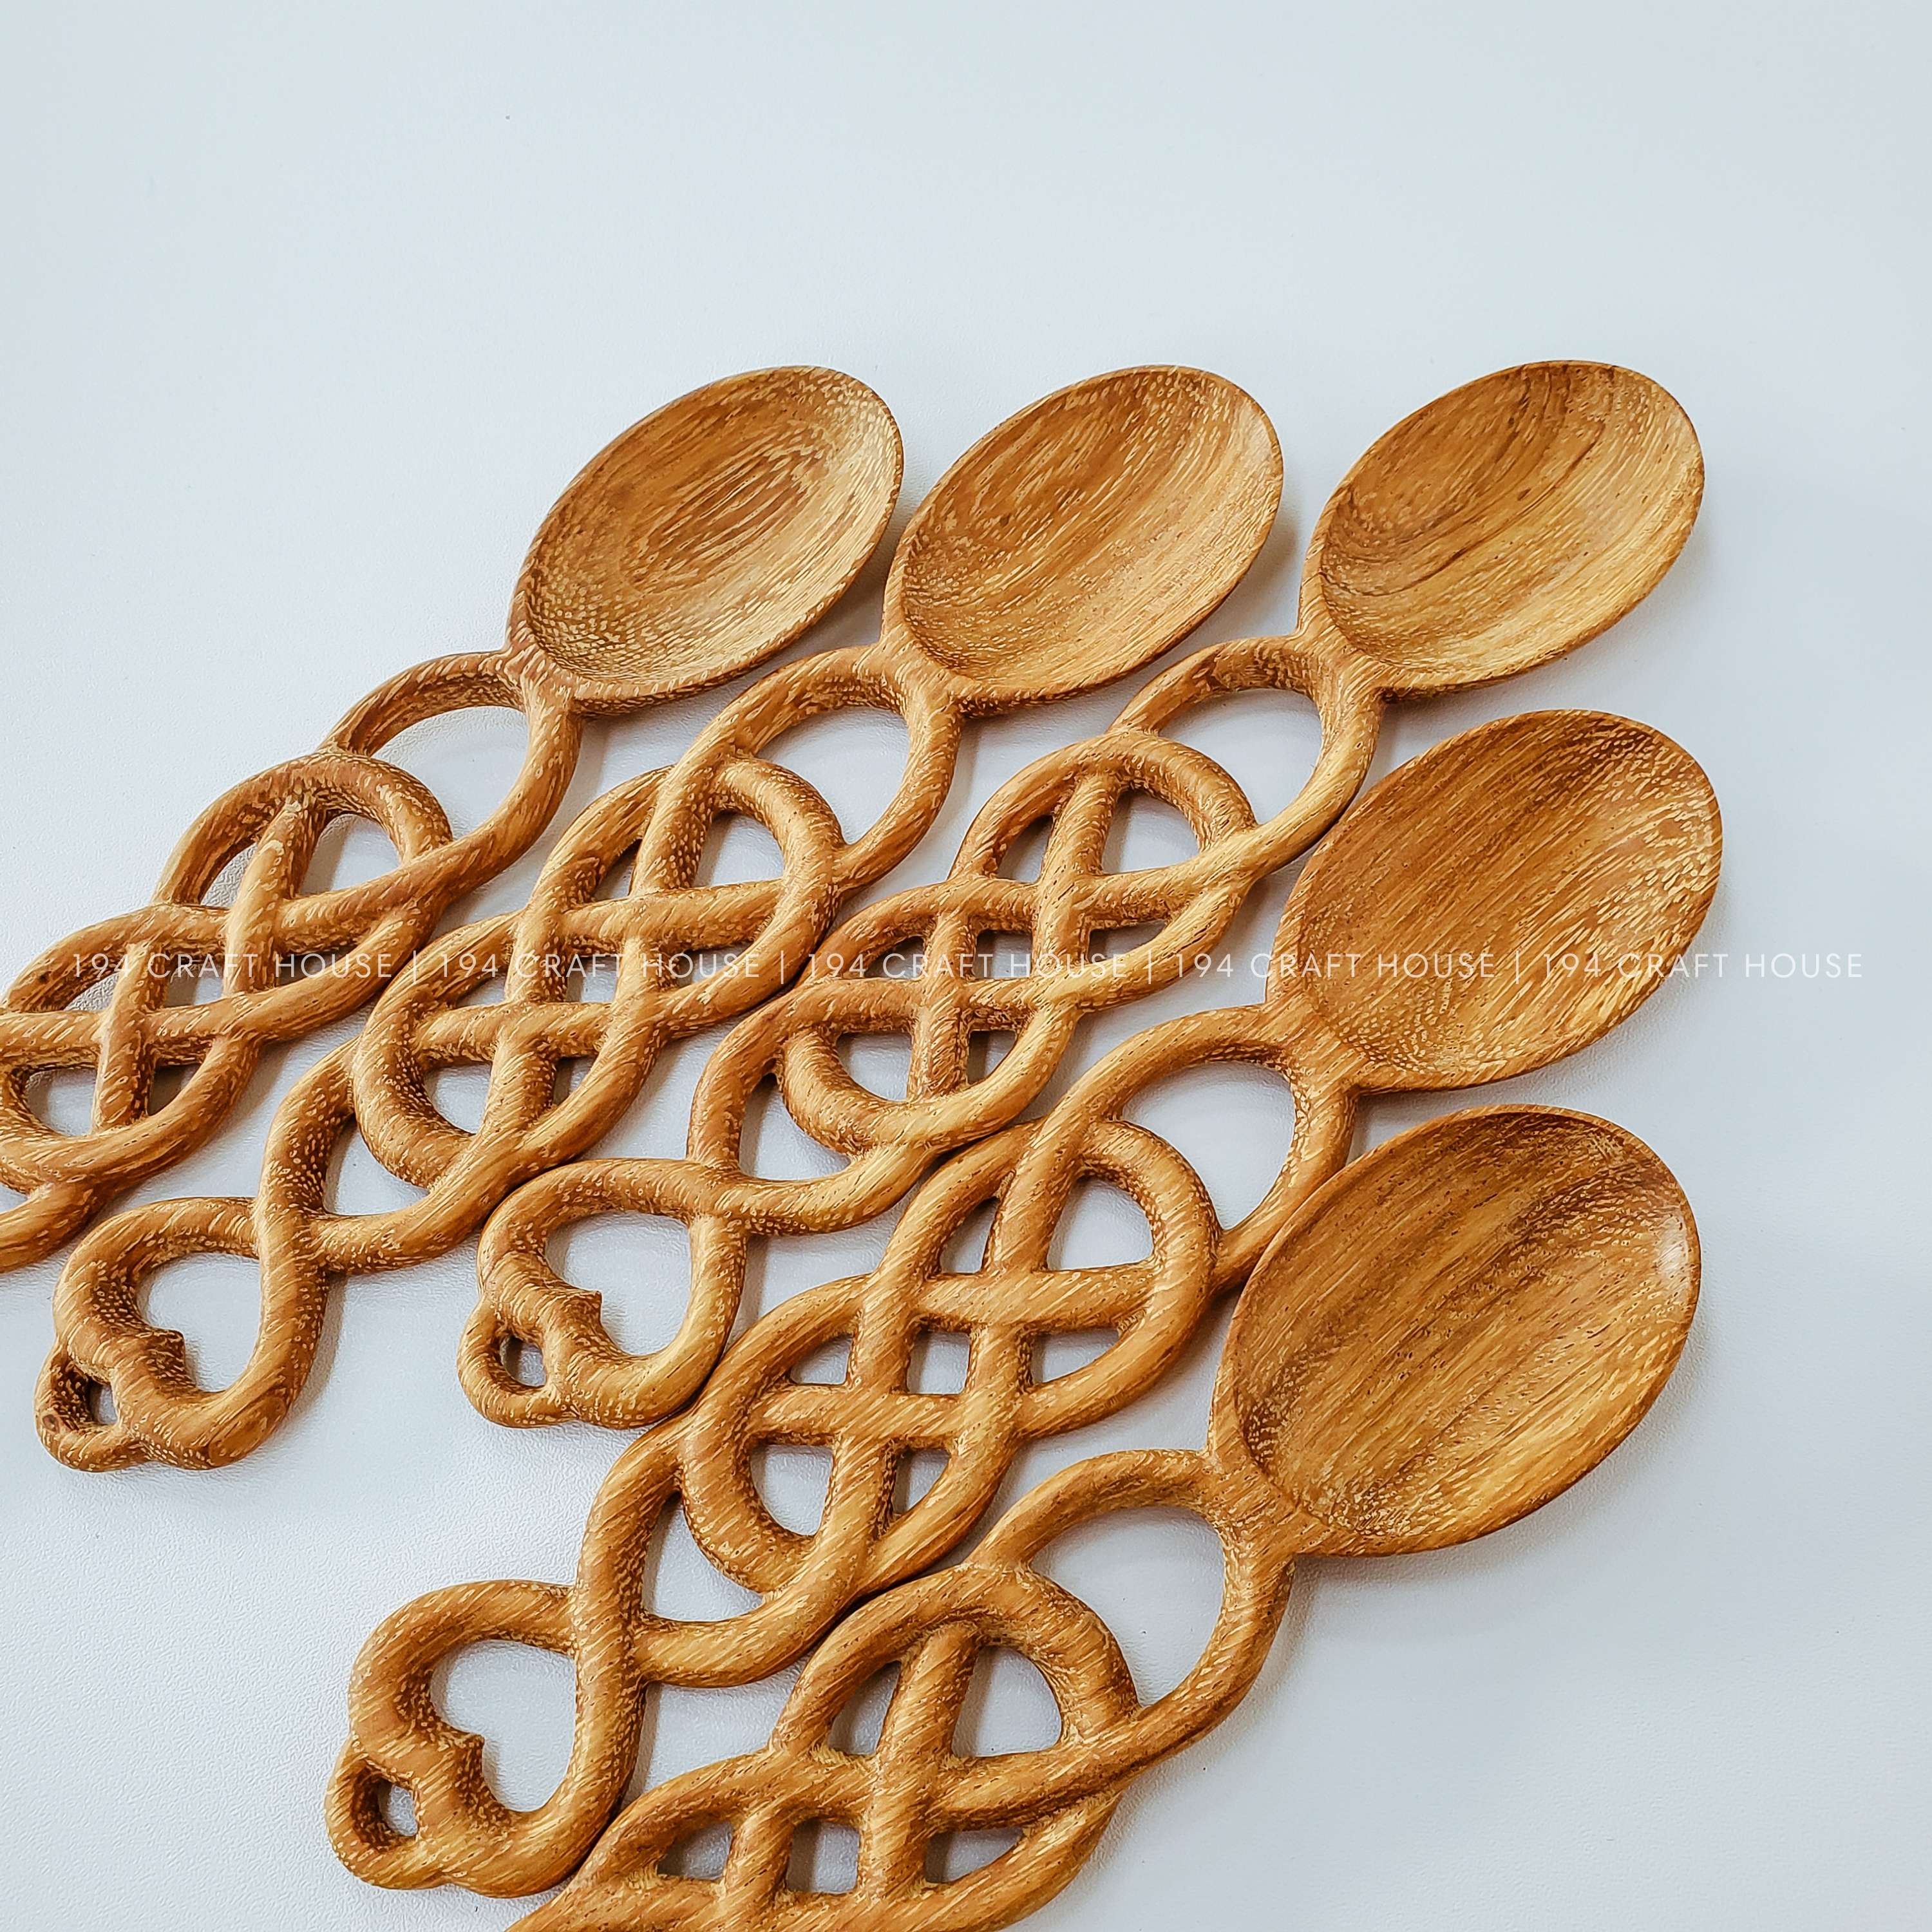 Hand-Carved Welsh Love Spoons